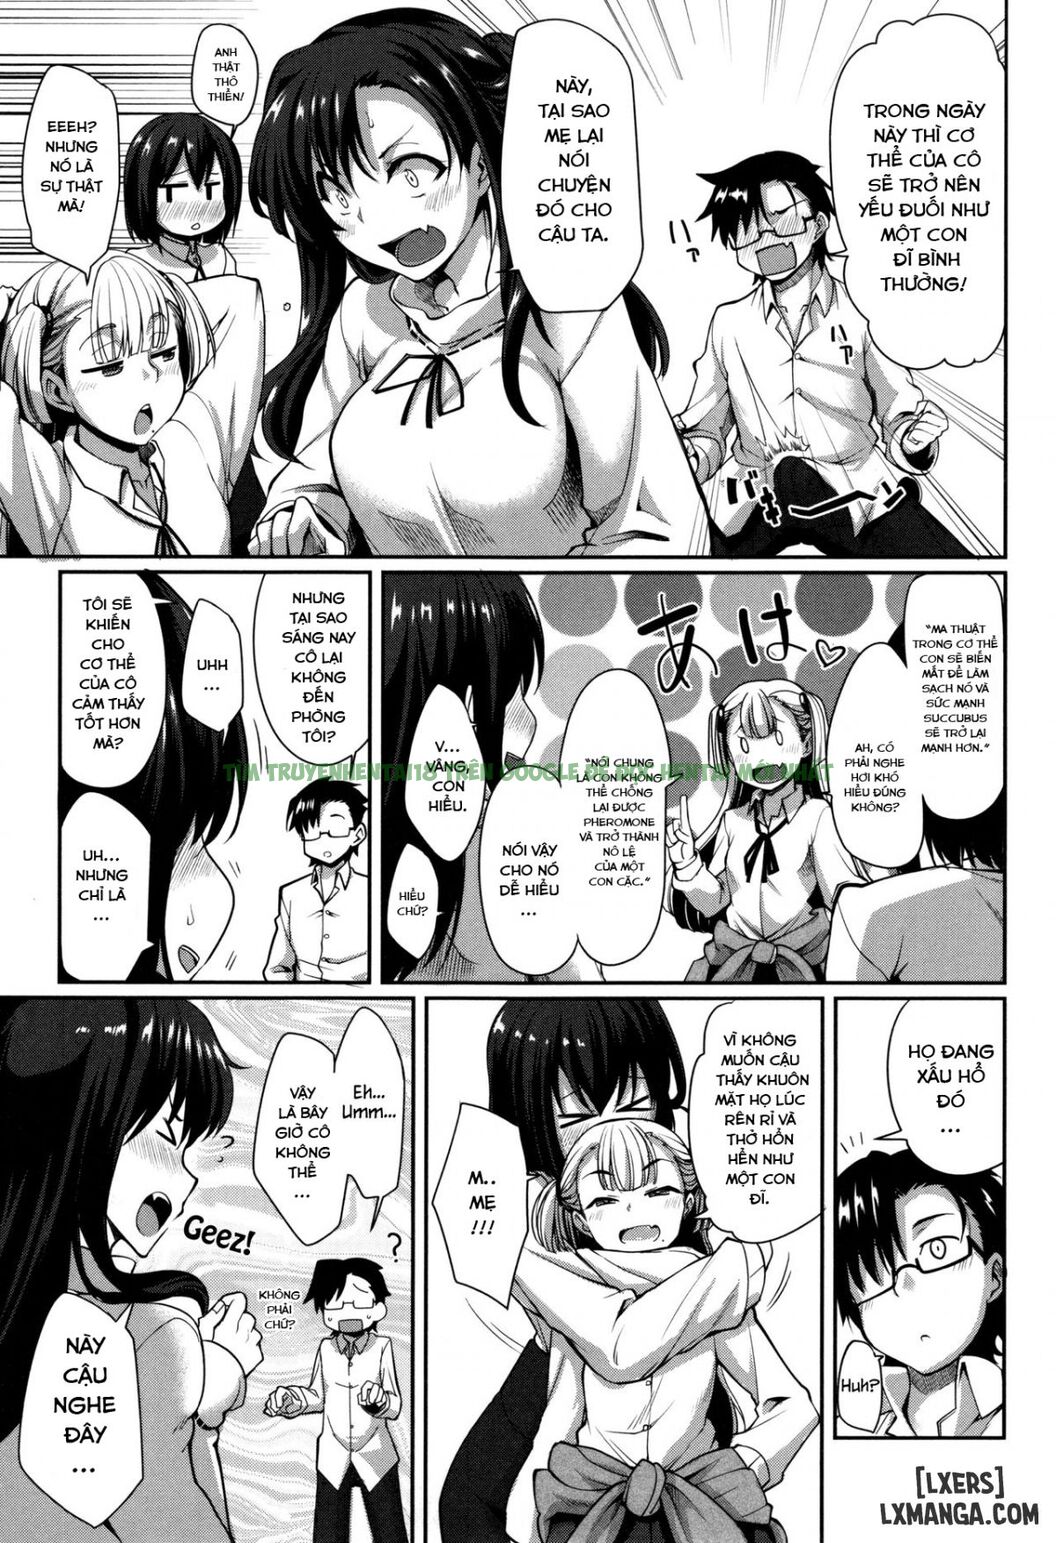 Xem ảnh Succubi's Supporter - Chapter 6 END - 2 - Hentai24h.Tv